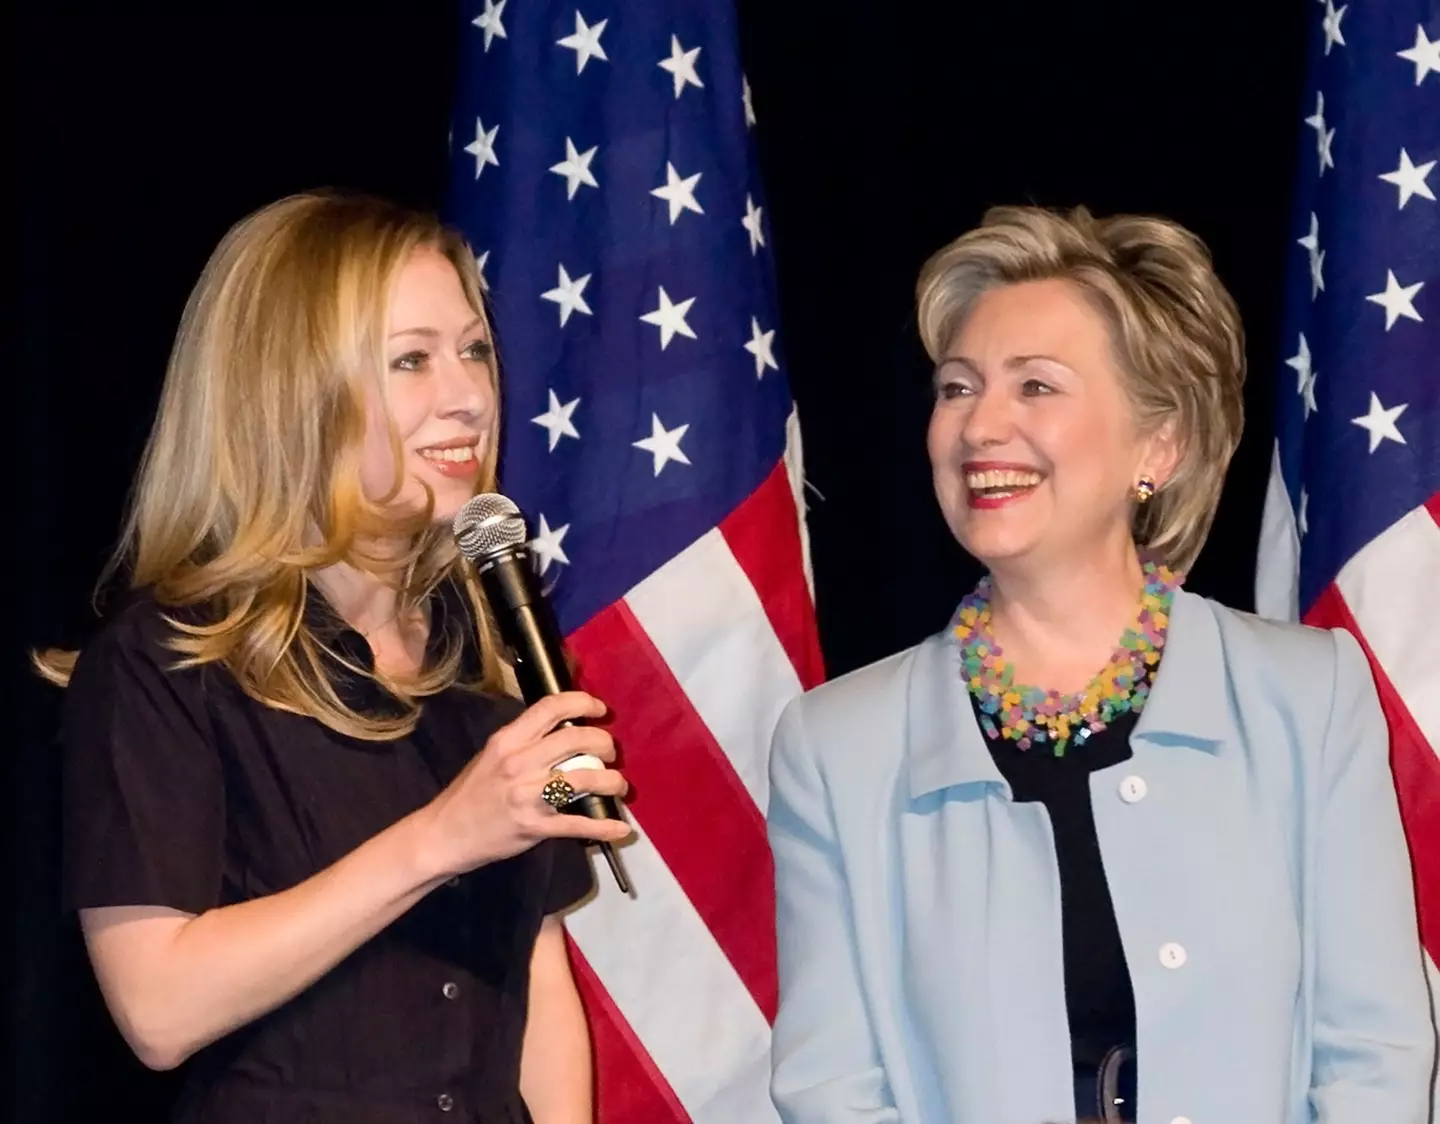 The pair went head-to-head on Clinton and her daughter, Chelsea Clinton's, upcoming documentary series Gutsy.